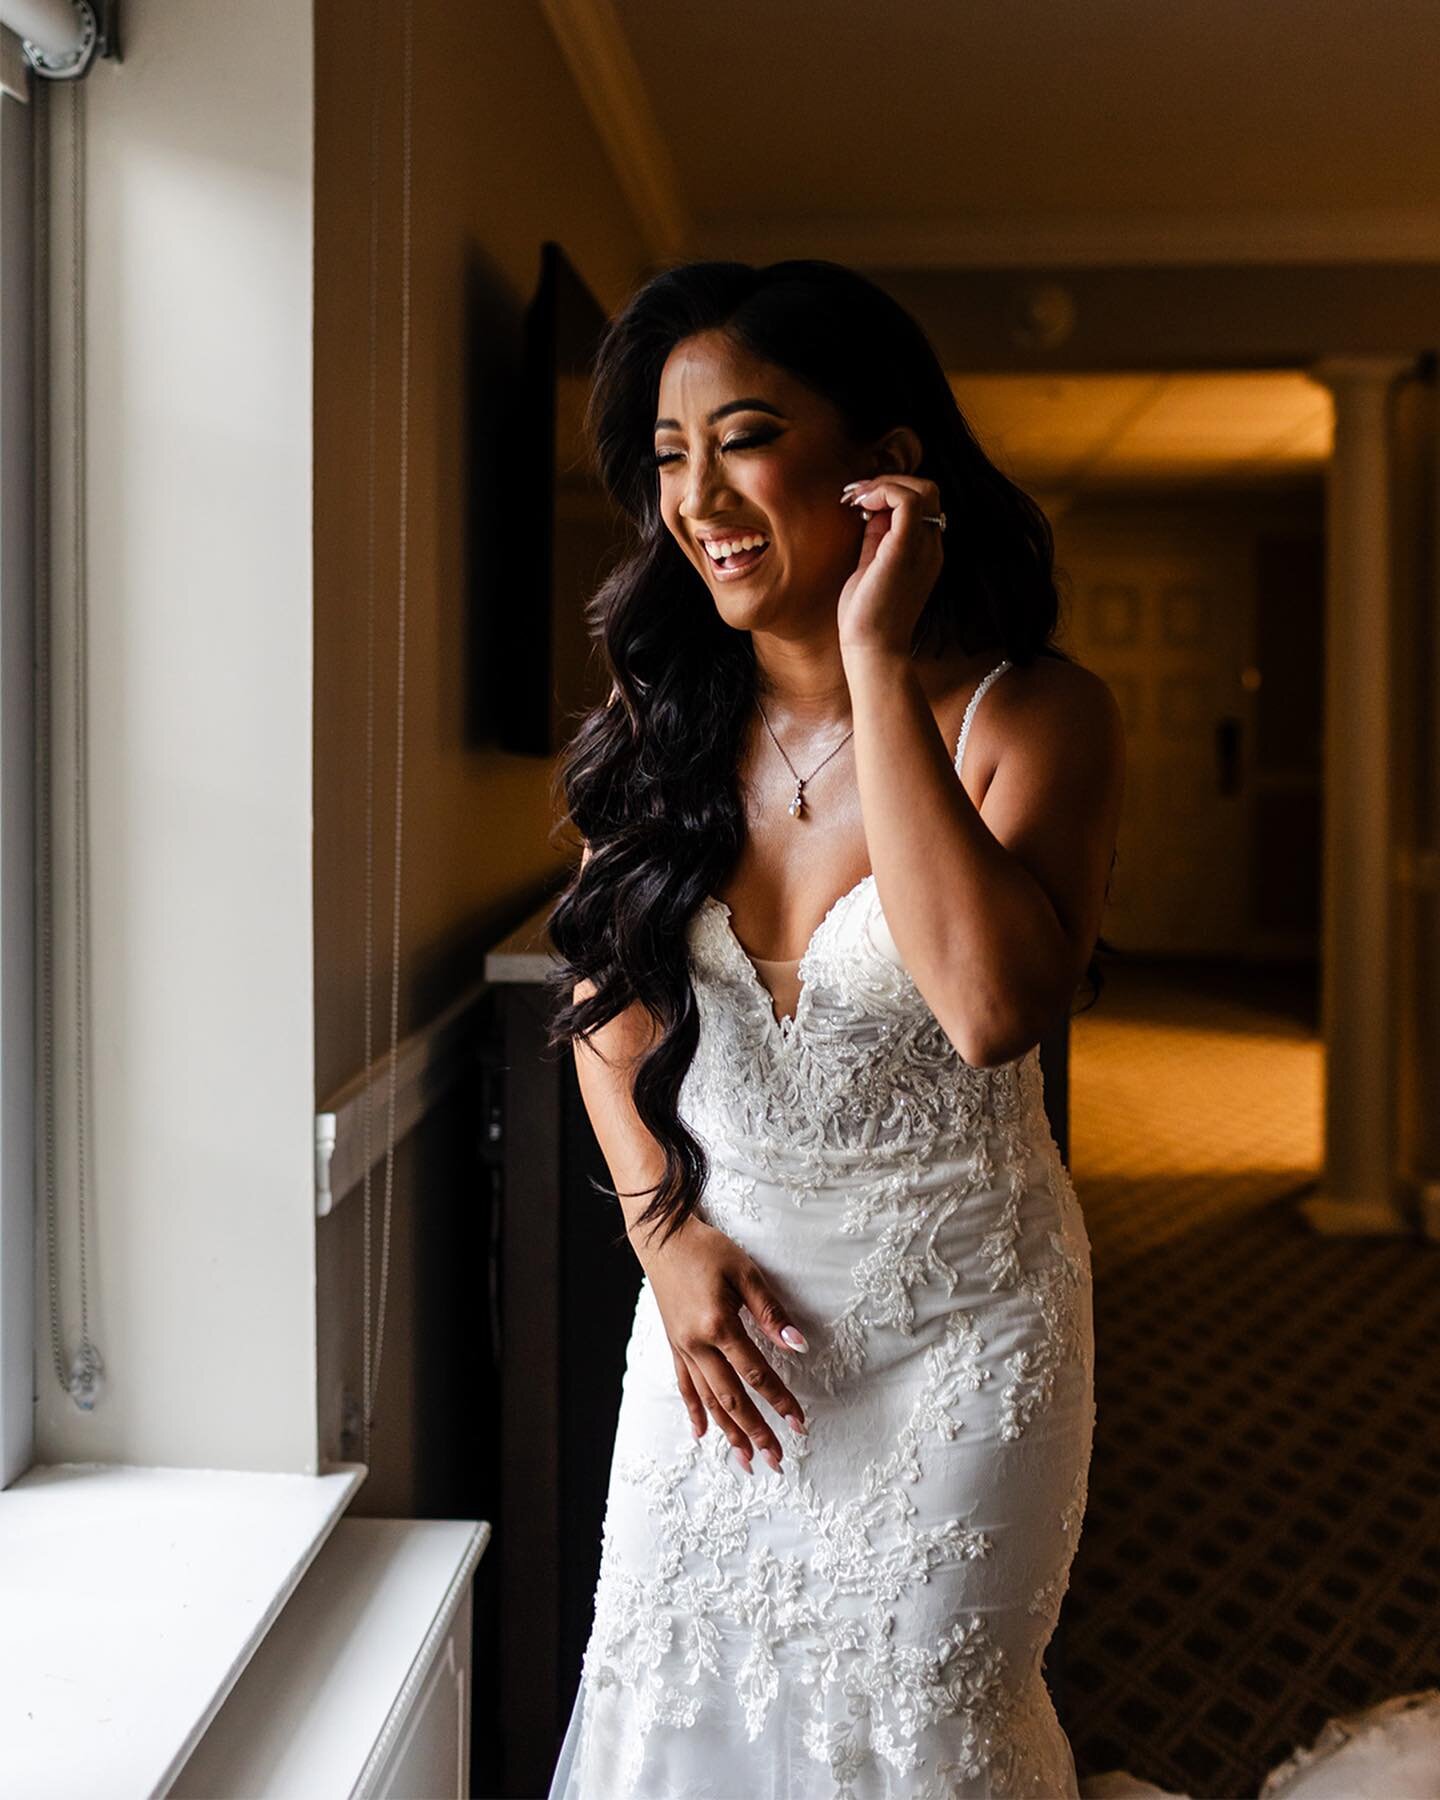 Let me take a moment to highlight Alexa&rsquo;s bridesmaids who went above and beyond to make sure she had a memorable wedding. Love when you can see the love and happiness your group of friends have on your wedding day. Scroll to see a few of my fav